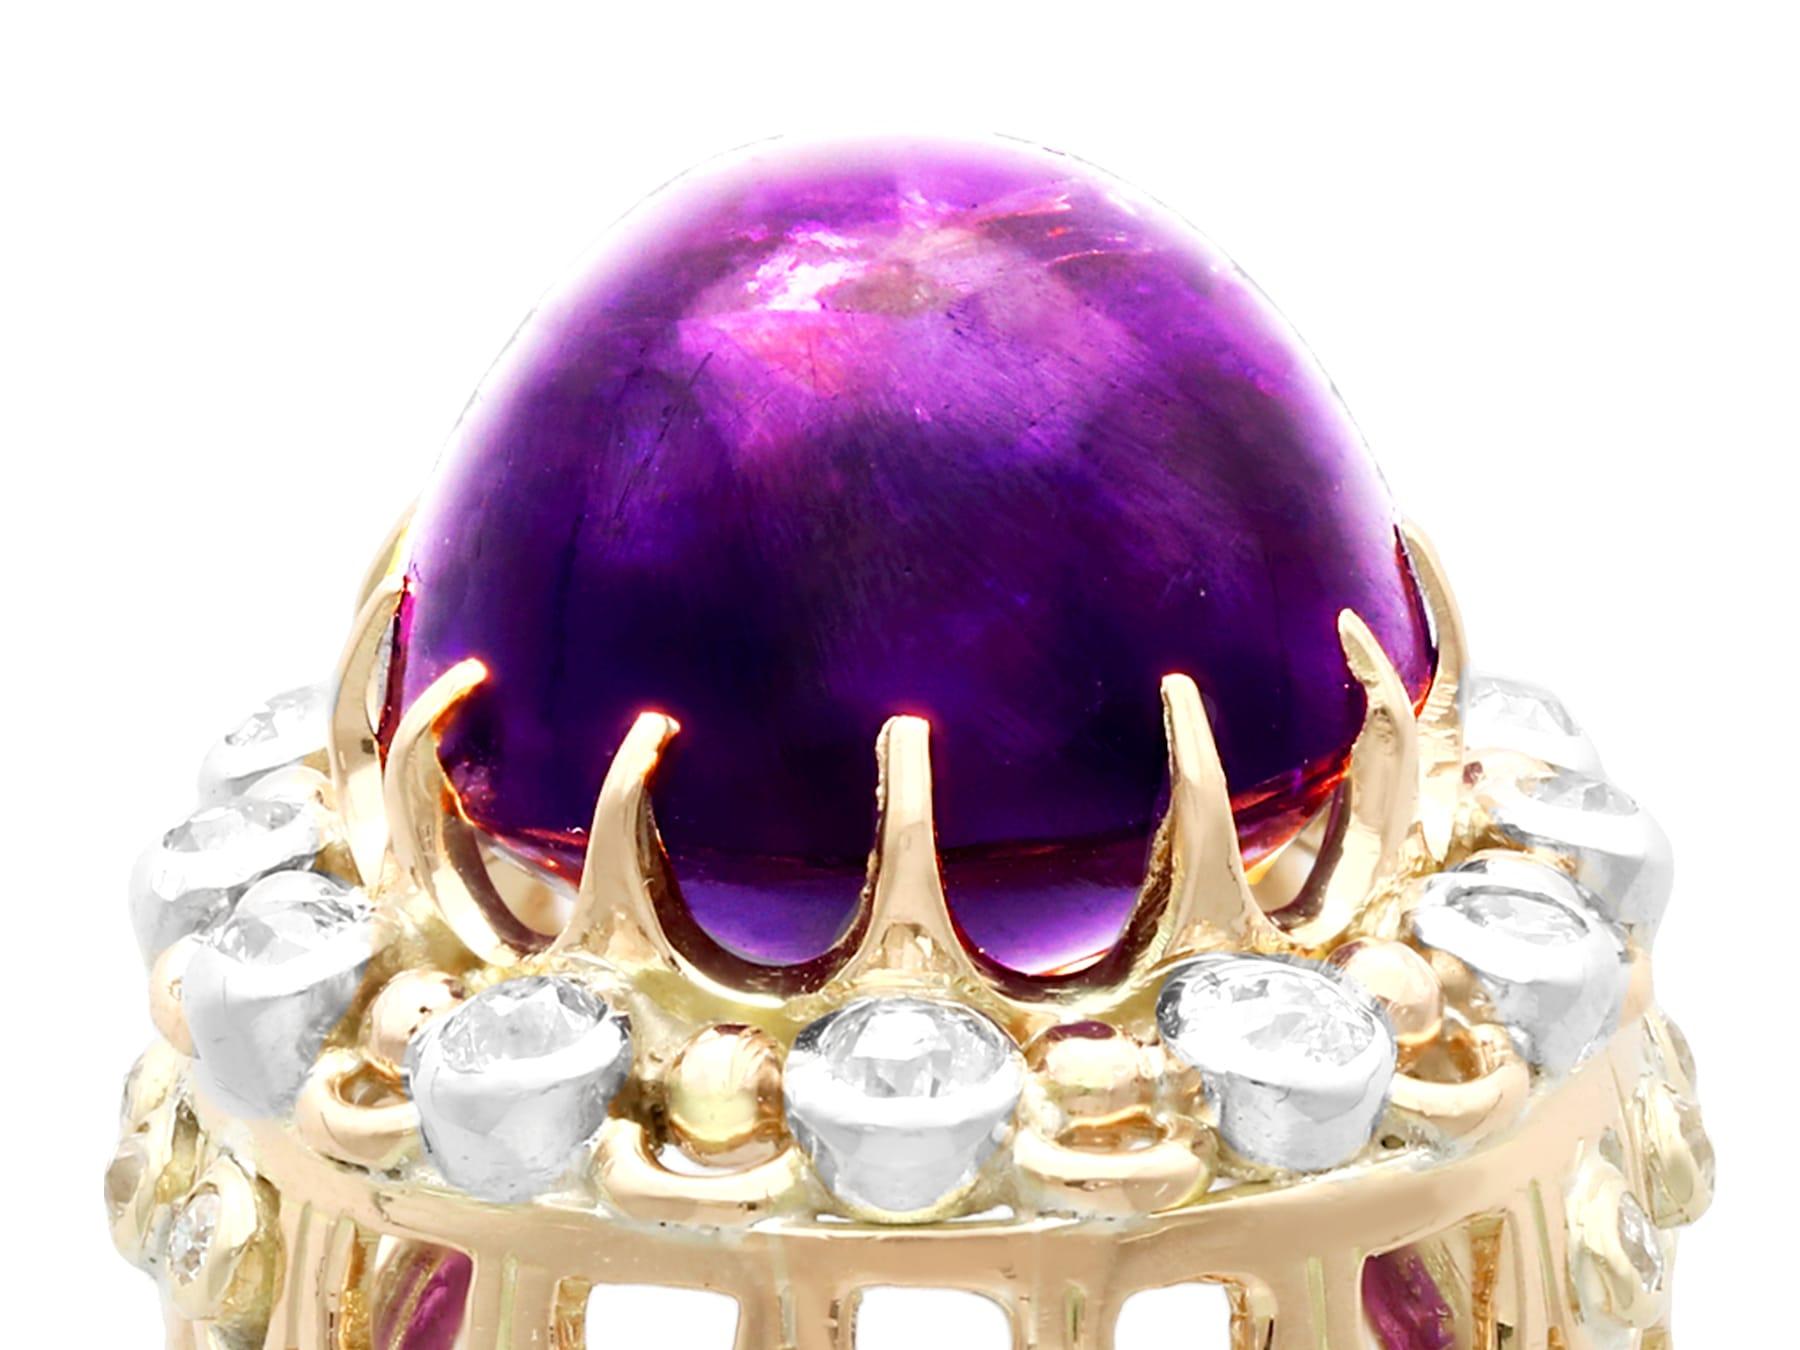 A stunning vintage 21.43 carat amethyst and 1.07 carat diamond, 14 karat yellow gold cocktail ring; part of our diverse antique jewelry and estate jewelry collections.

This stunning vintage cabochon cut amethyst and diamond ring has been crafted in